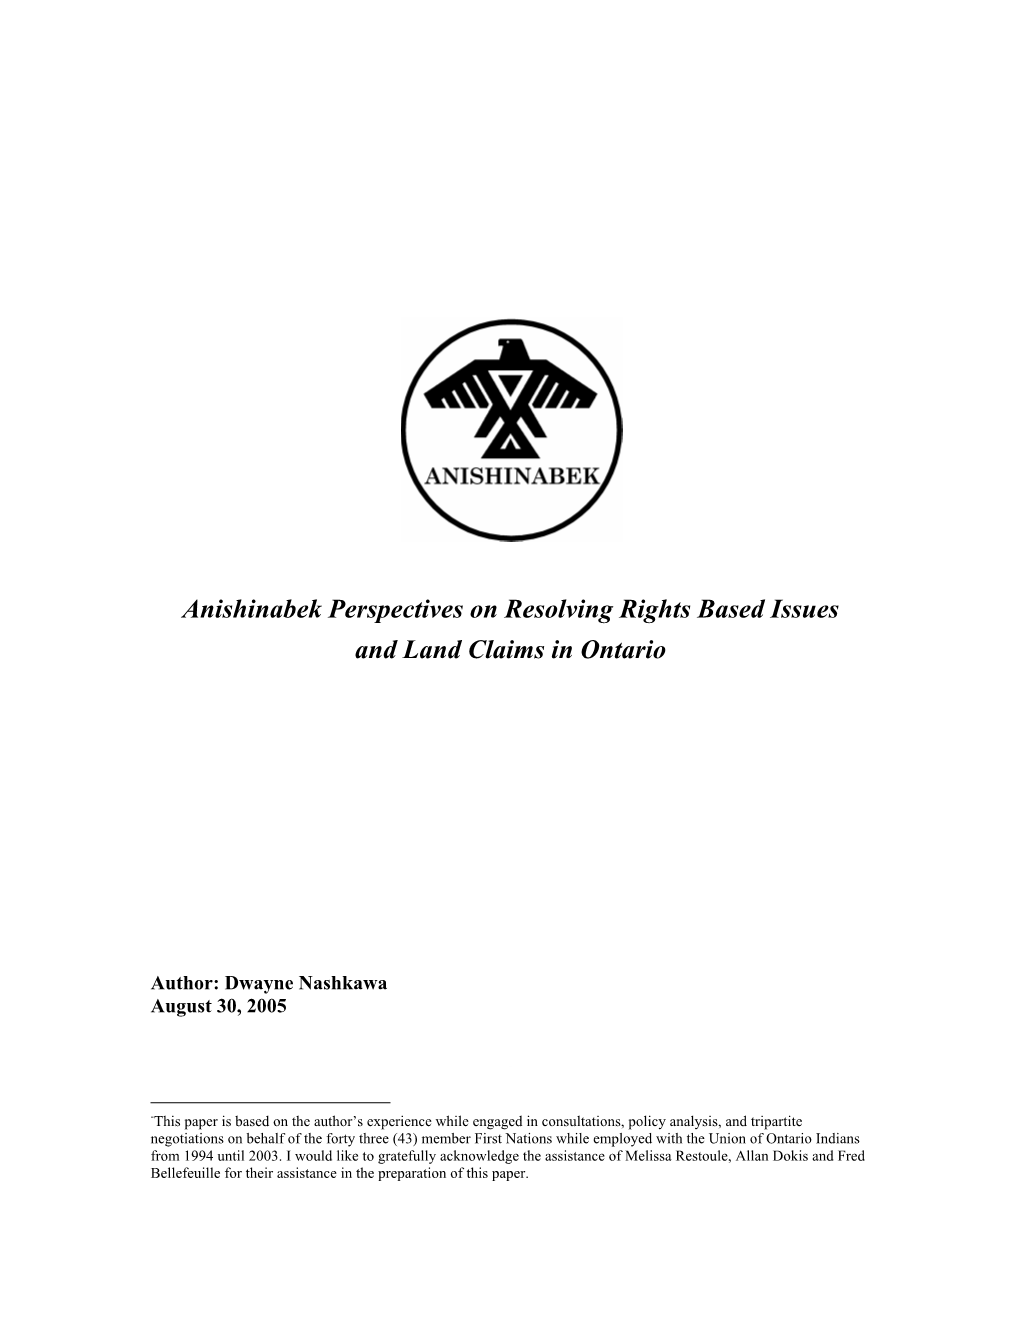 Anishinabek Perspectives on Resolving Rights Based Issues and Land Claims in Ontario